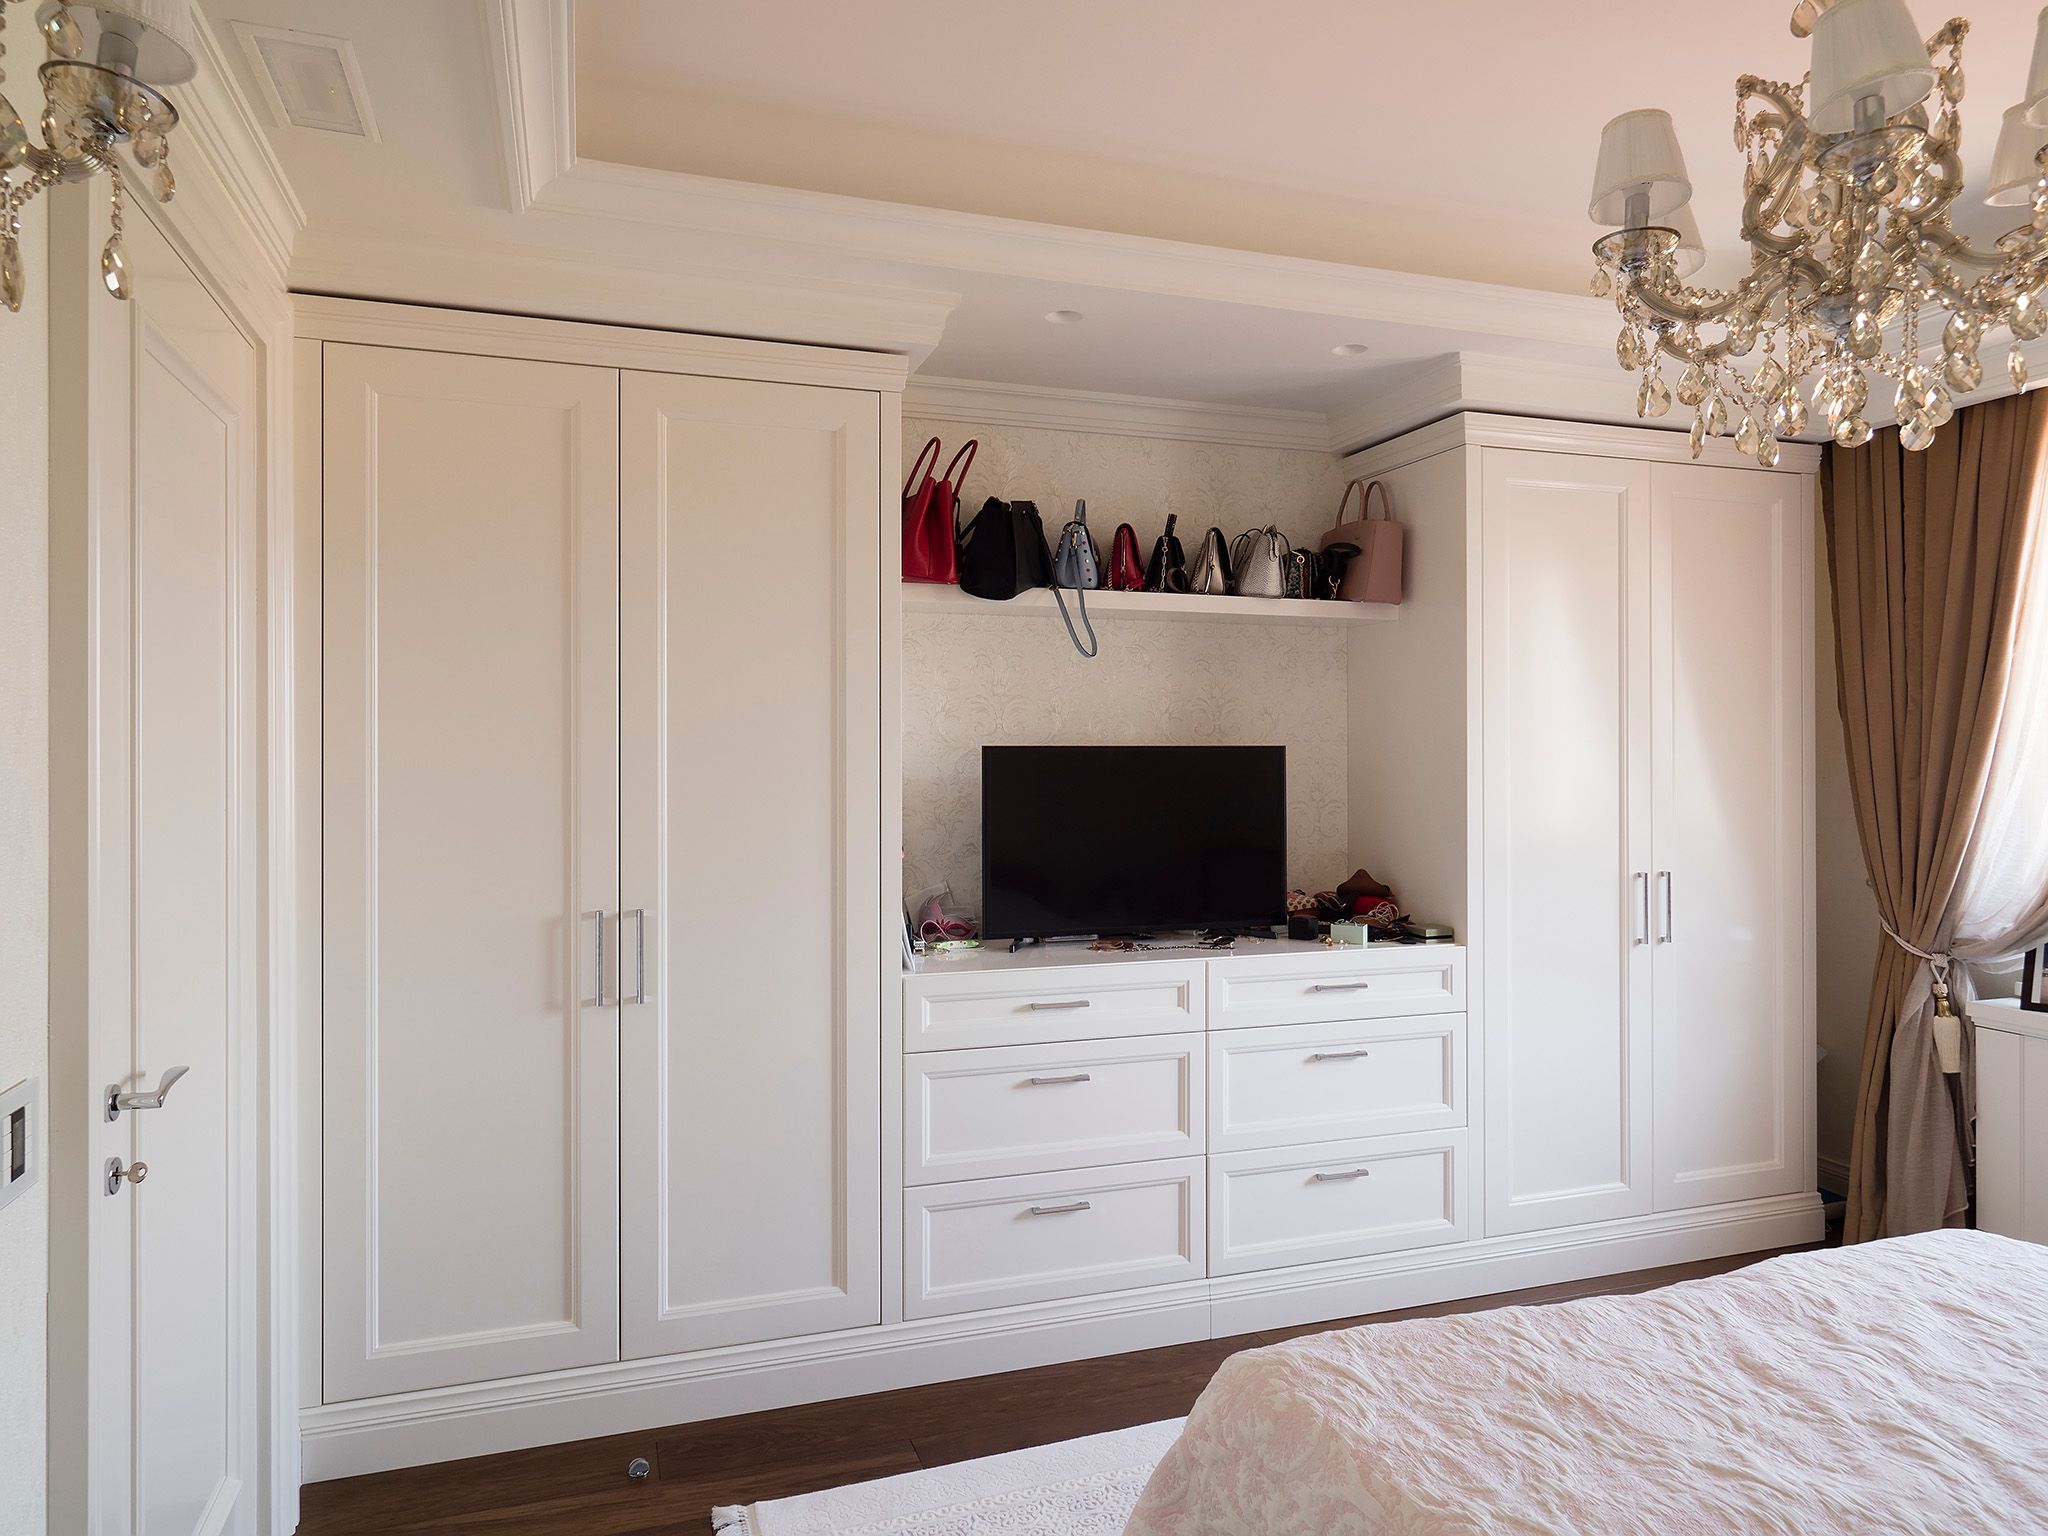 Fitted Wardrobes Ideas | Bedroom Ideas For Couples Throughout Bedroom Wardrobes (View 18 of 20)